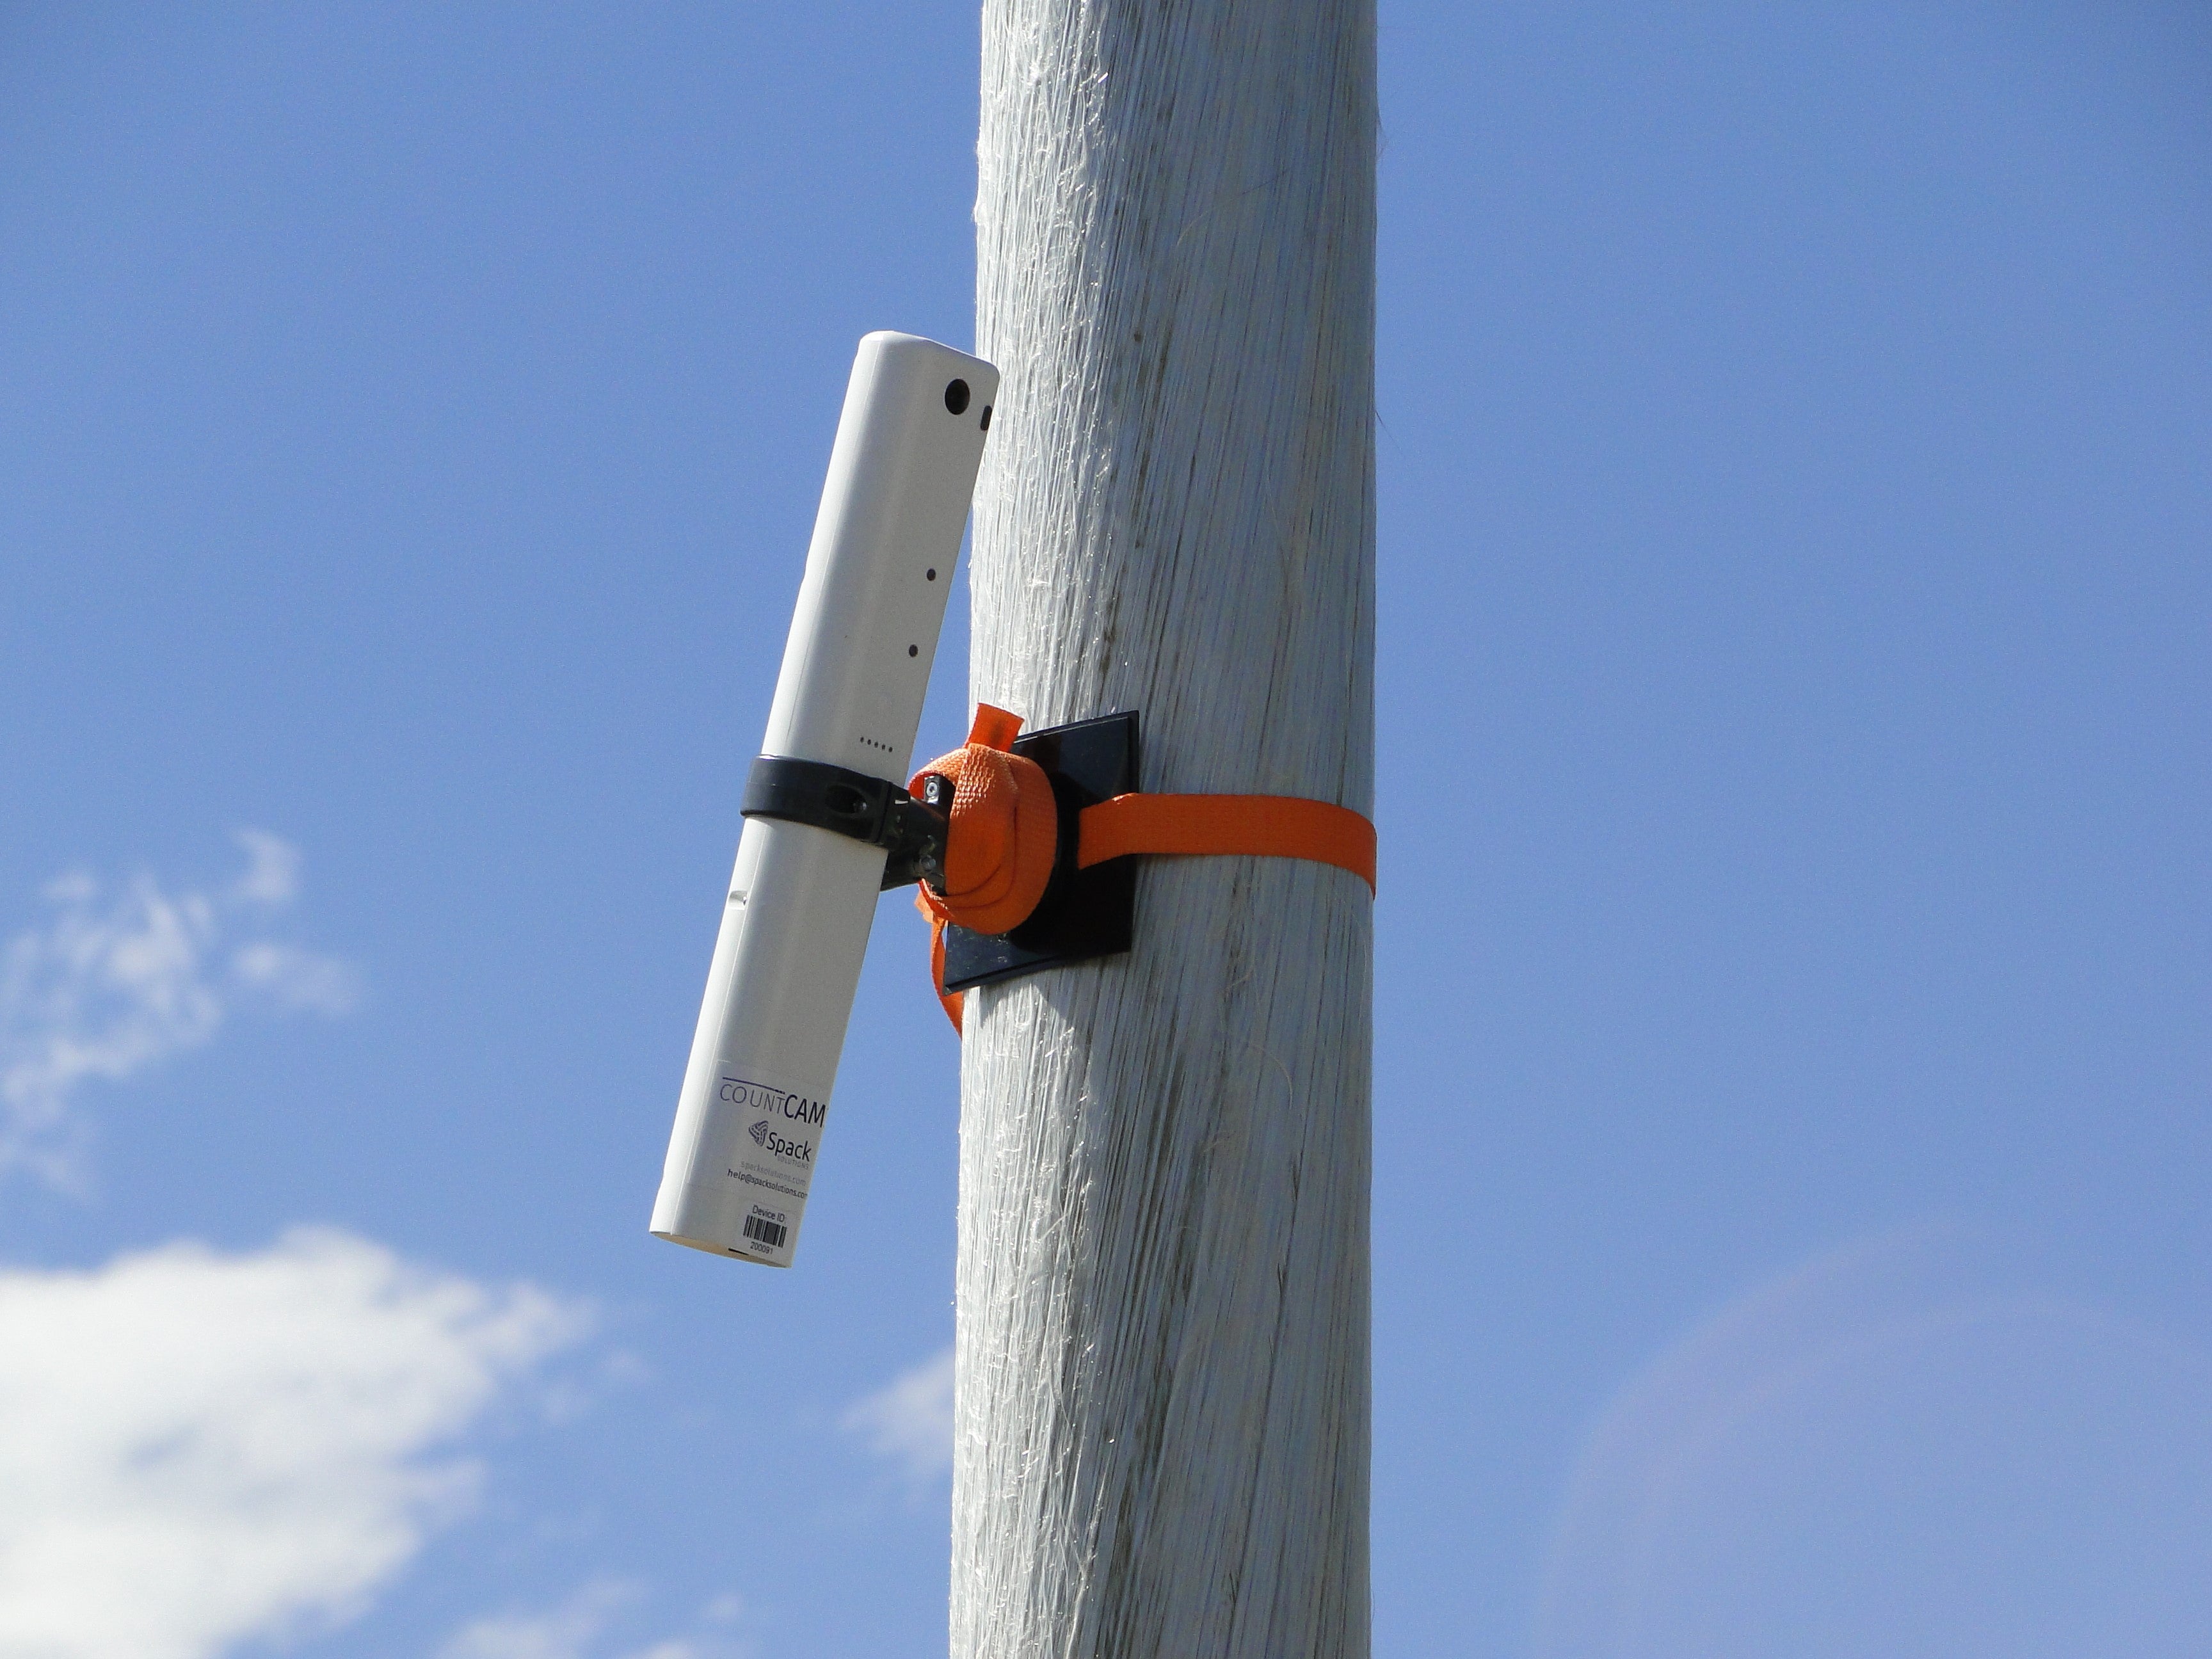 a countCAM3+ mounted to a light pole with a modified mount and orange ratchet.